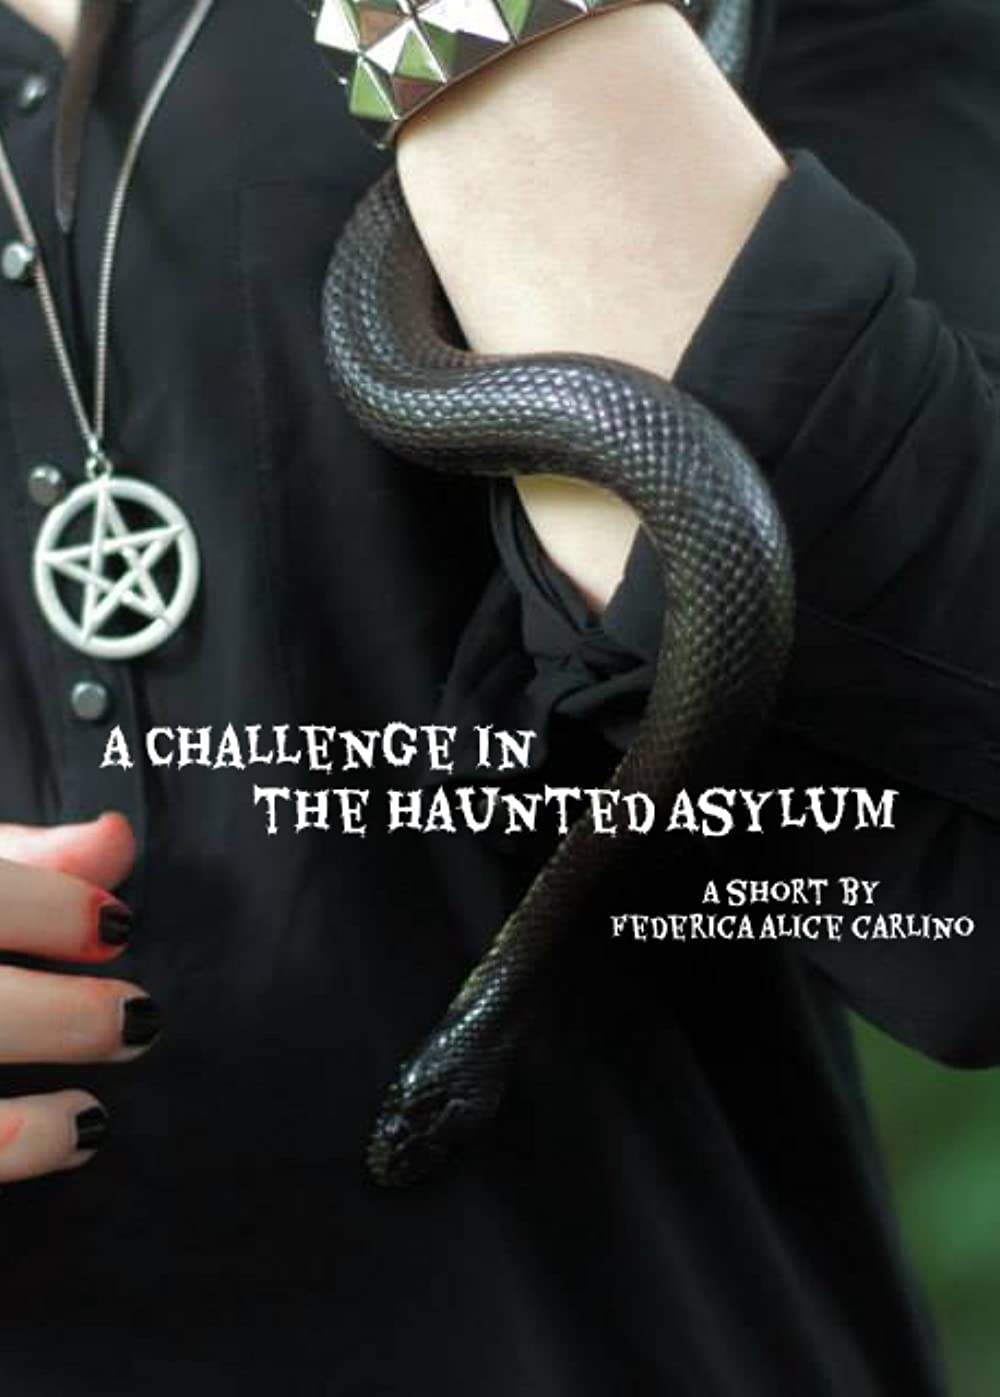 A Challenge in The Haunted Asylum